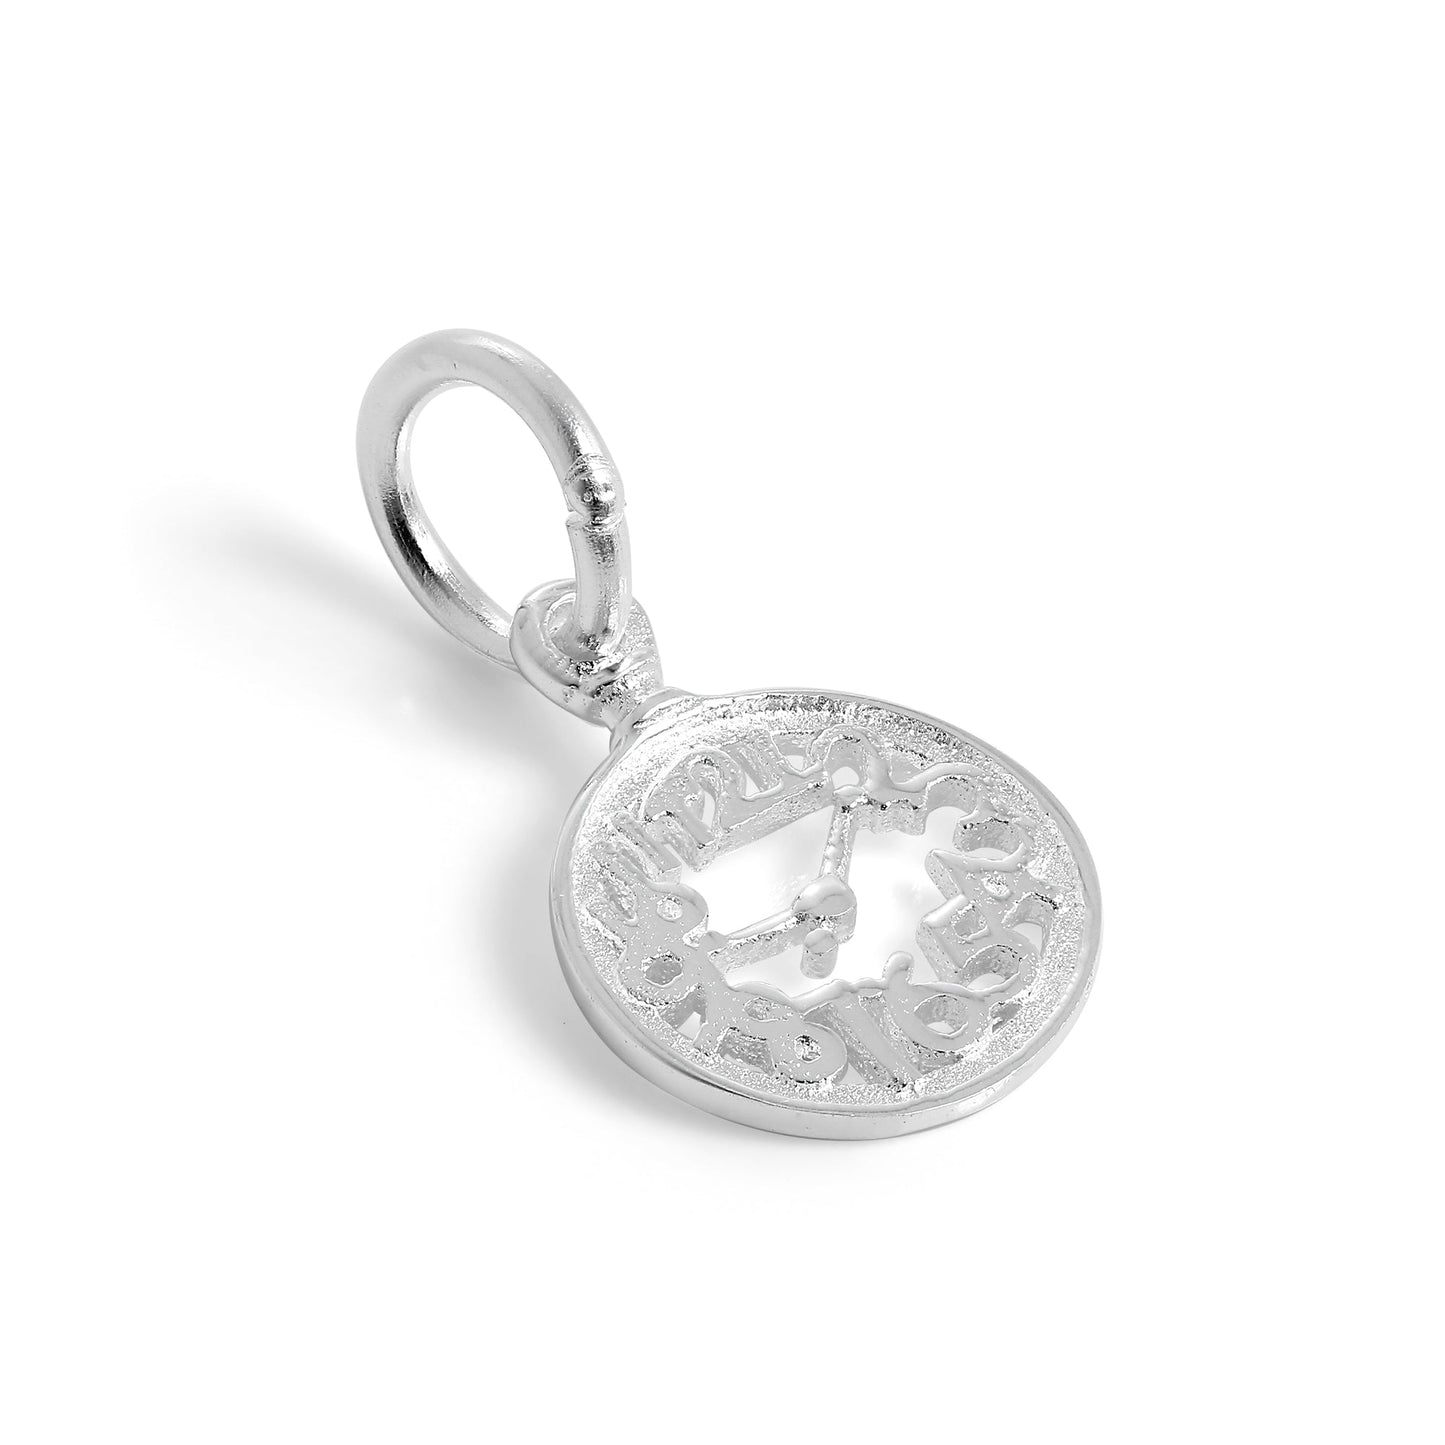 Small Sterling Silver Alice in Wonderland Clock Face Charm